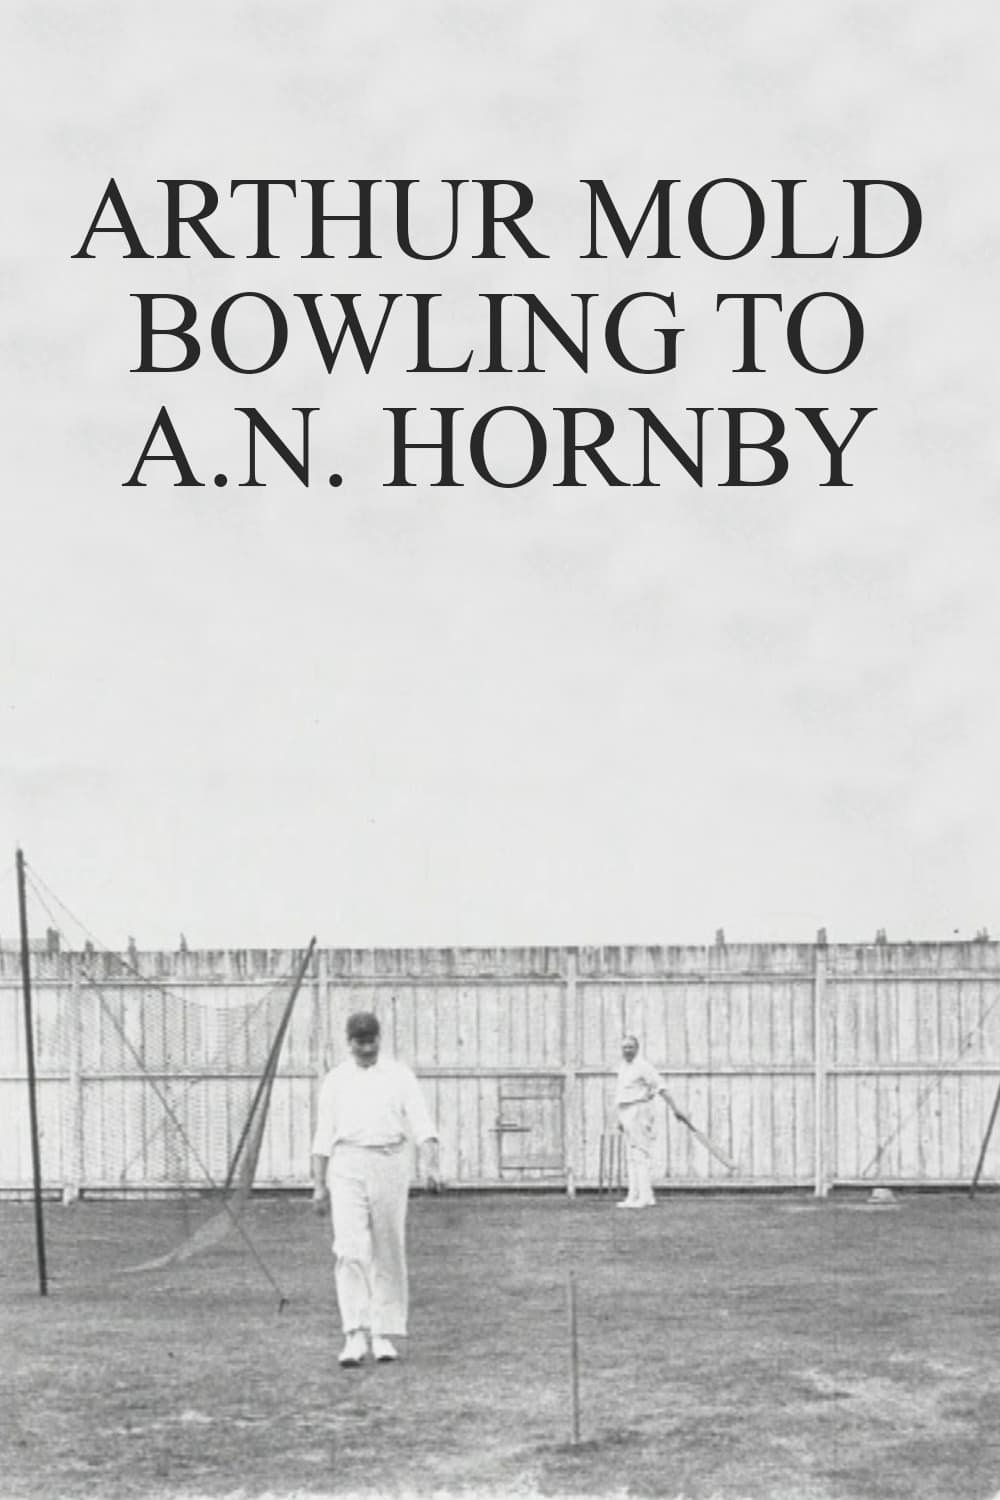 Arthur Mold Bowling to A.N. Hornby